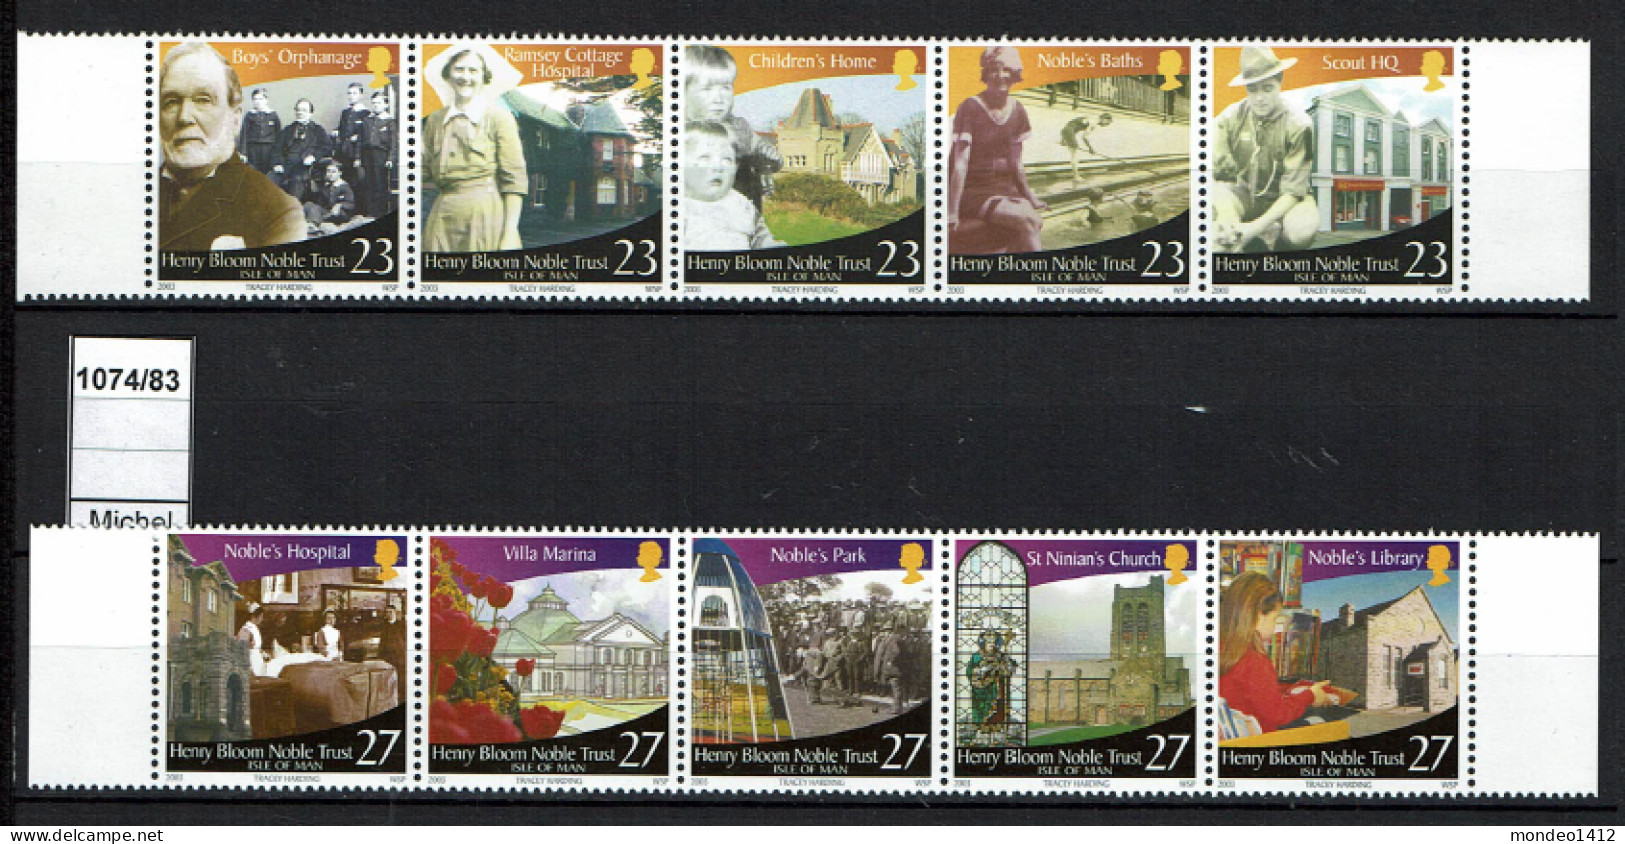 Isle Of Man - 2003 - MNH - The Henry Bloom Noble Trust Is One Of The Longest Established Charities On The Isle Of Man - Isle Of Man